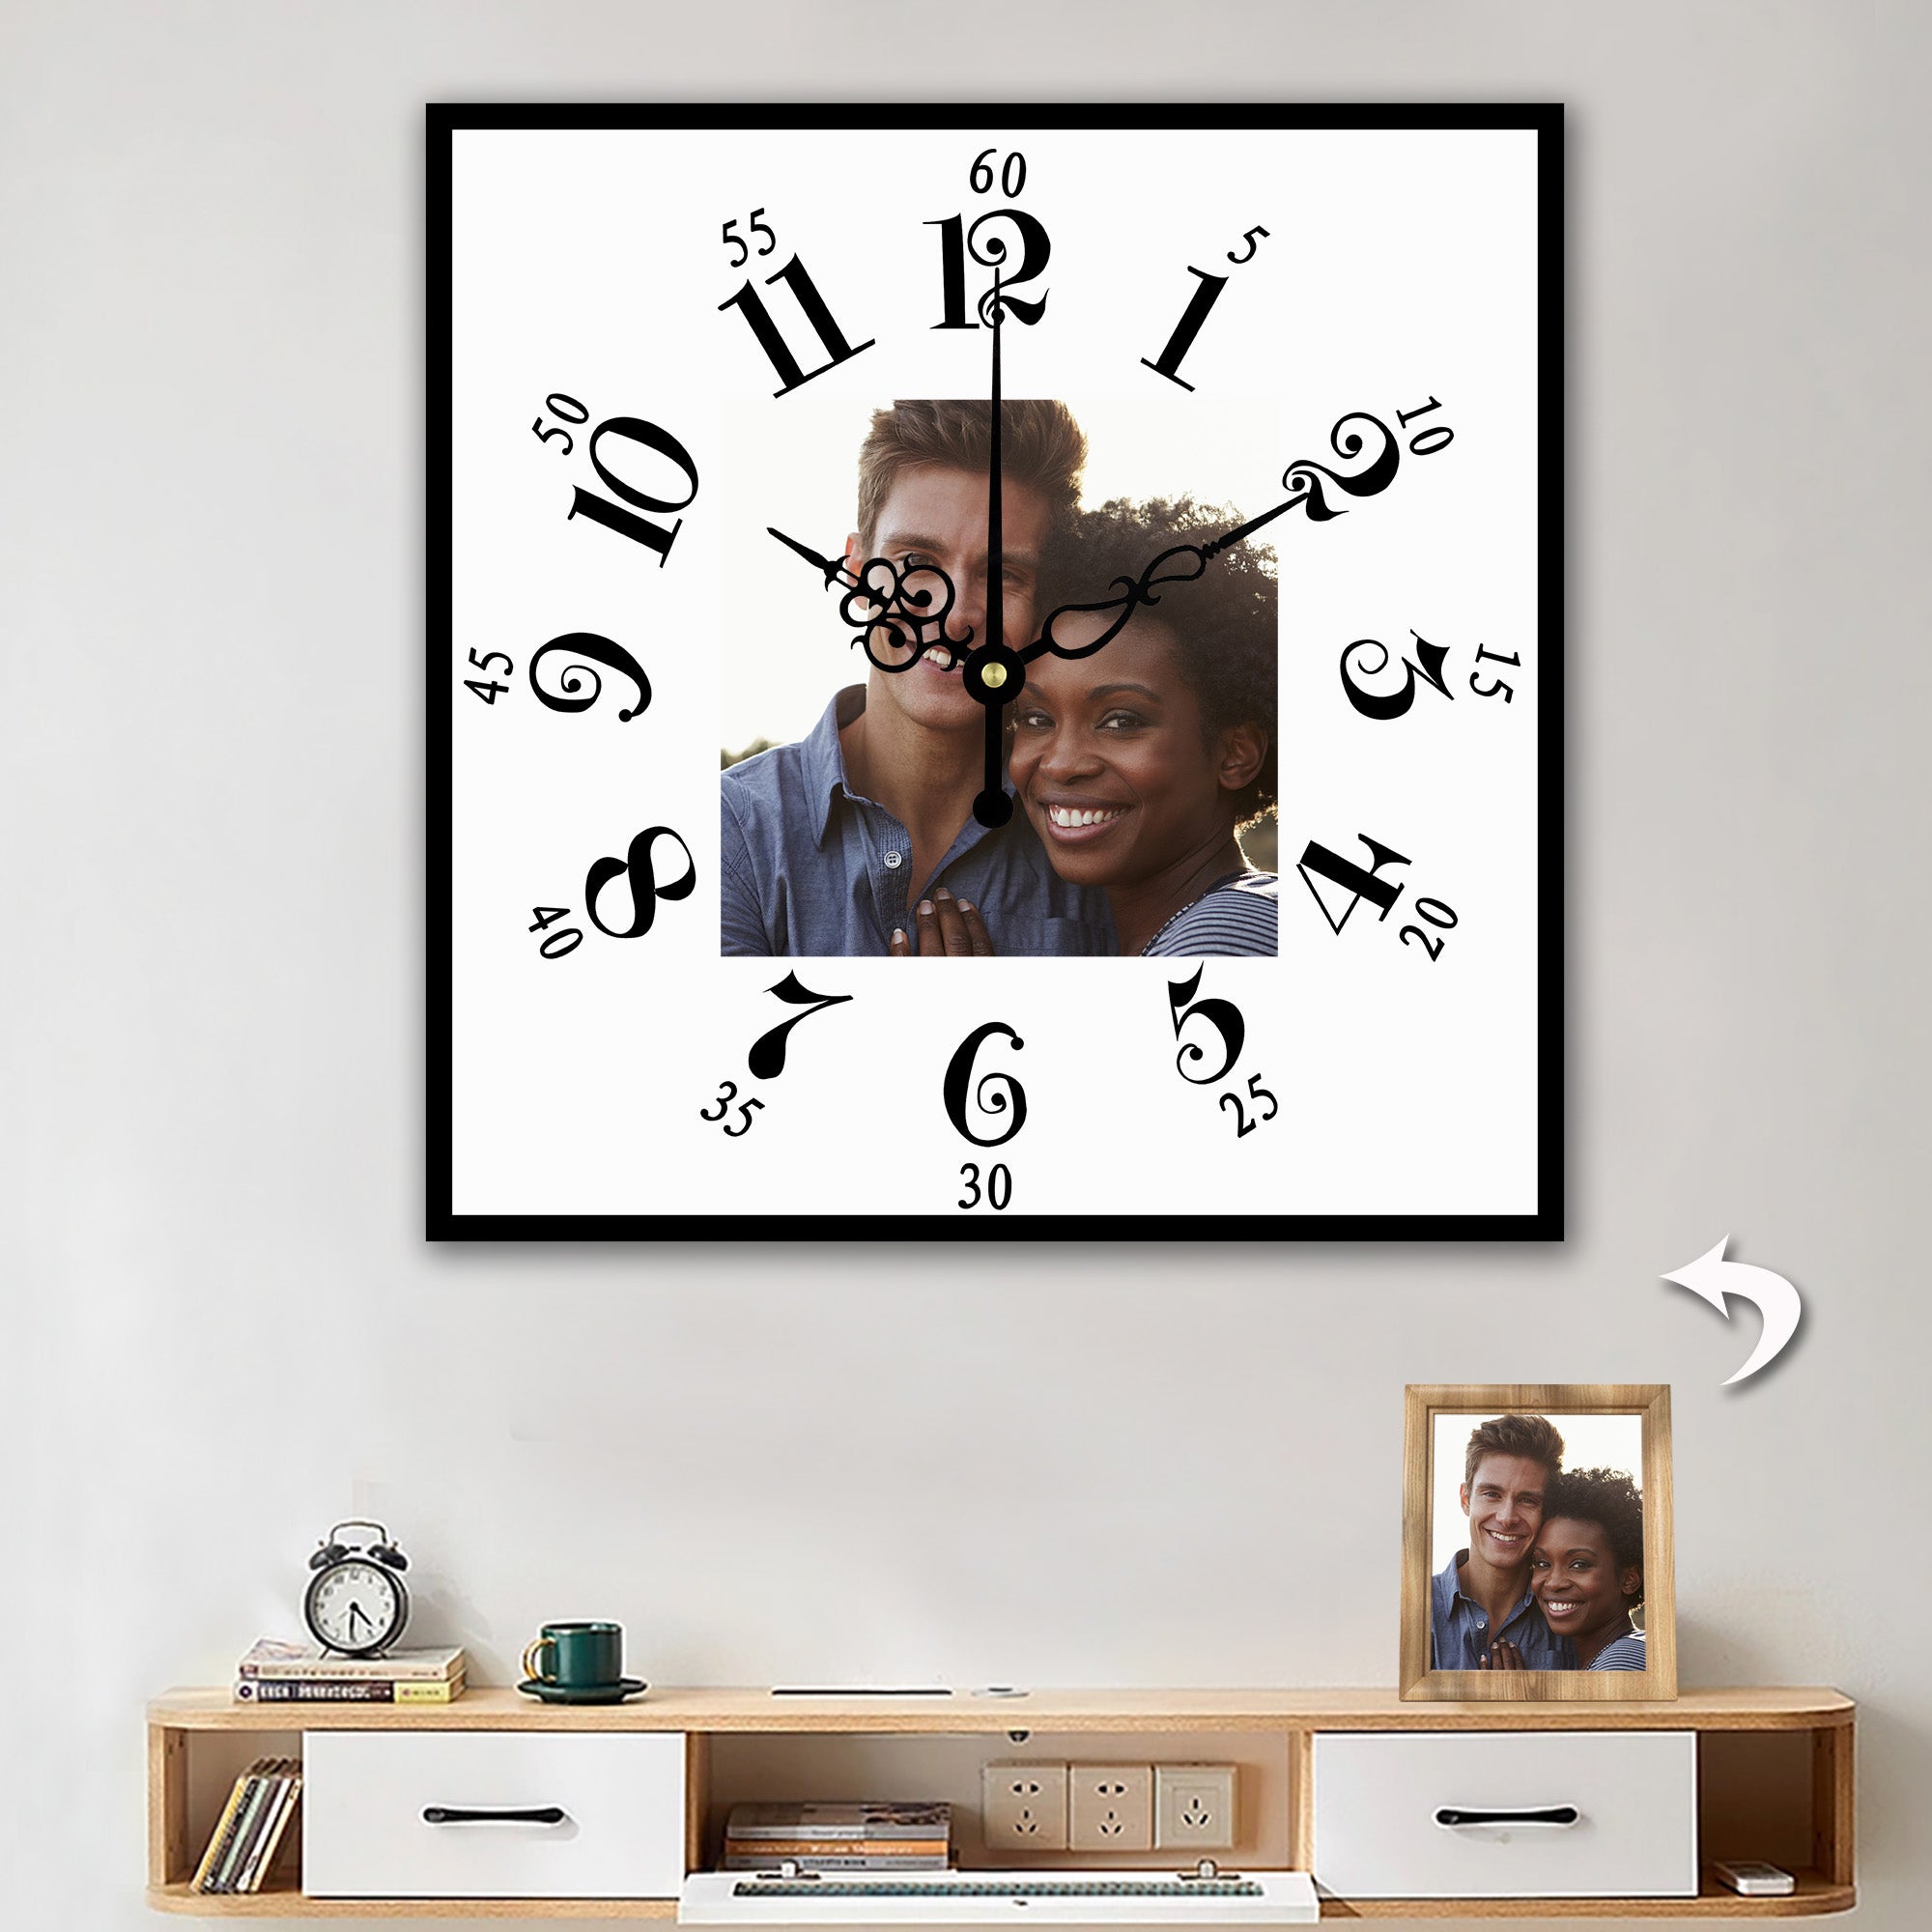 Personalized Photo Wall Clocks Customized Square Silent Gift Idea